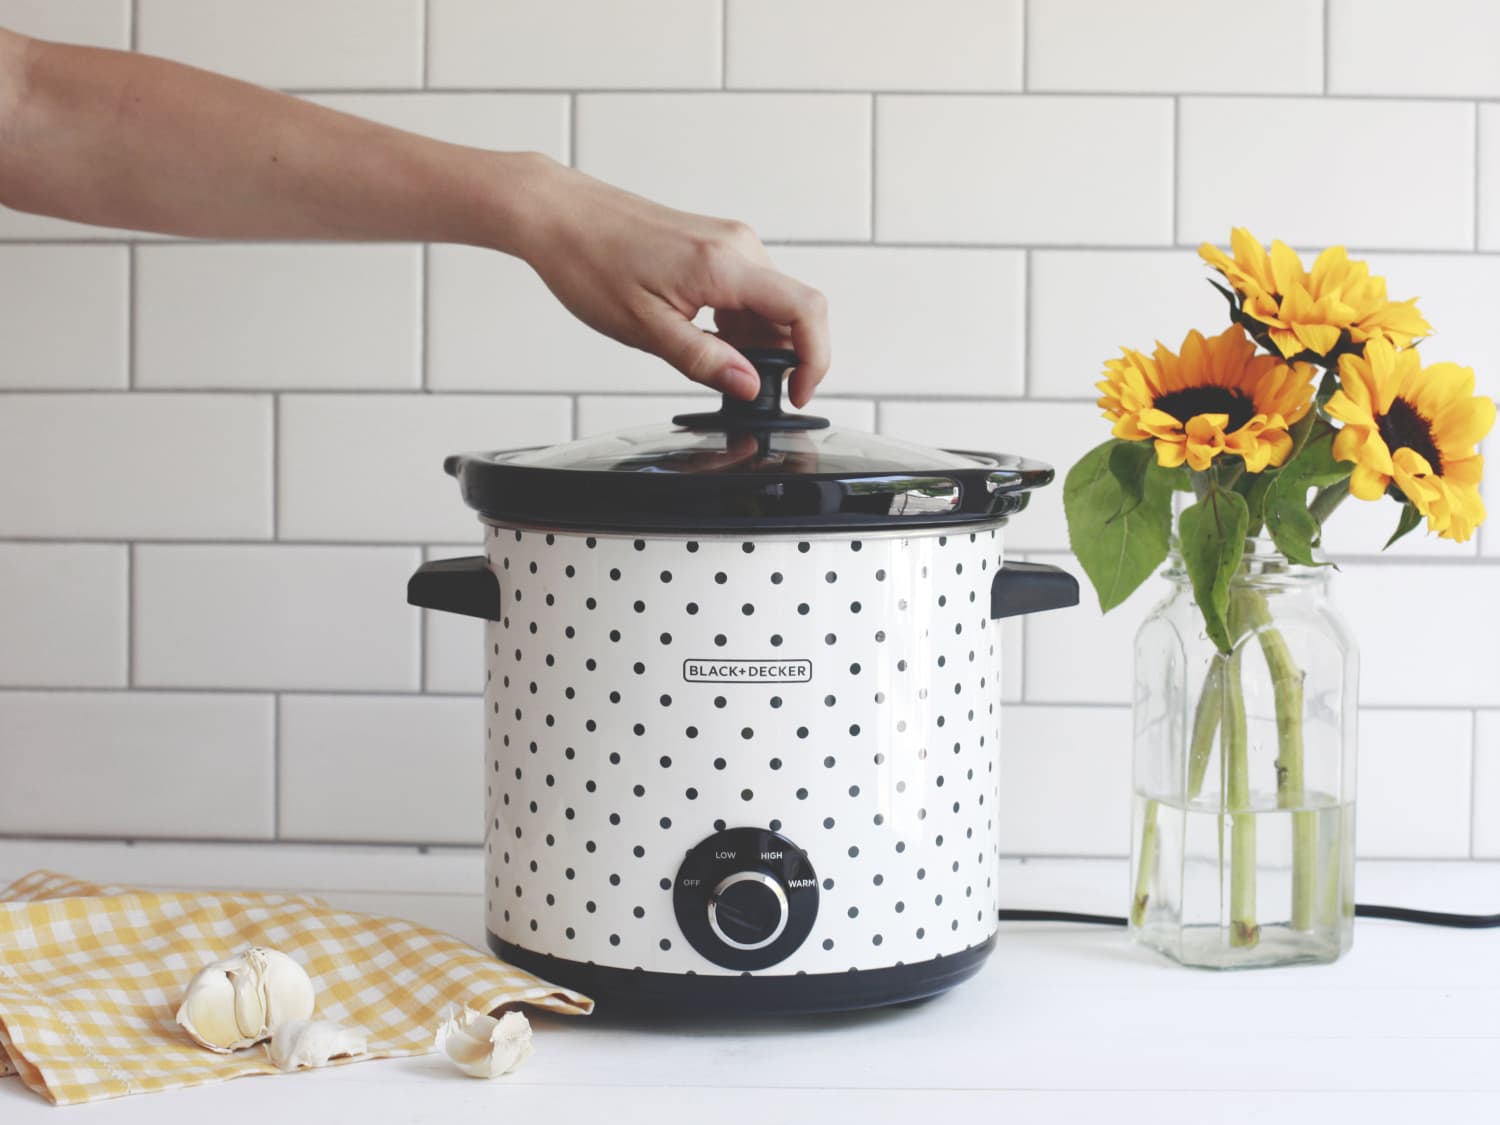 The One Slow Cooker Pretty Enough for Your Table